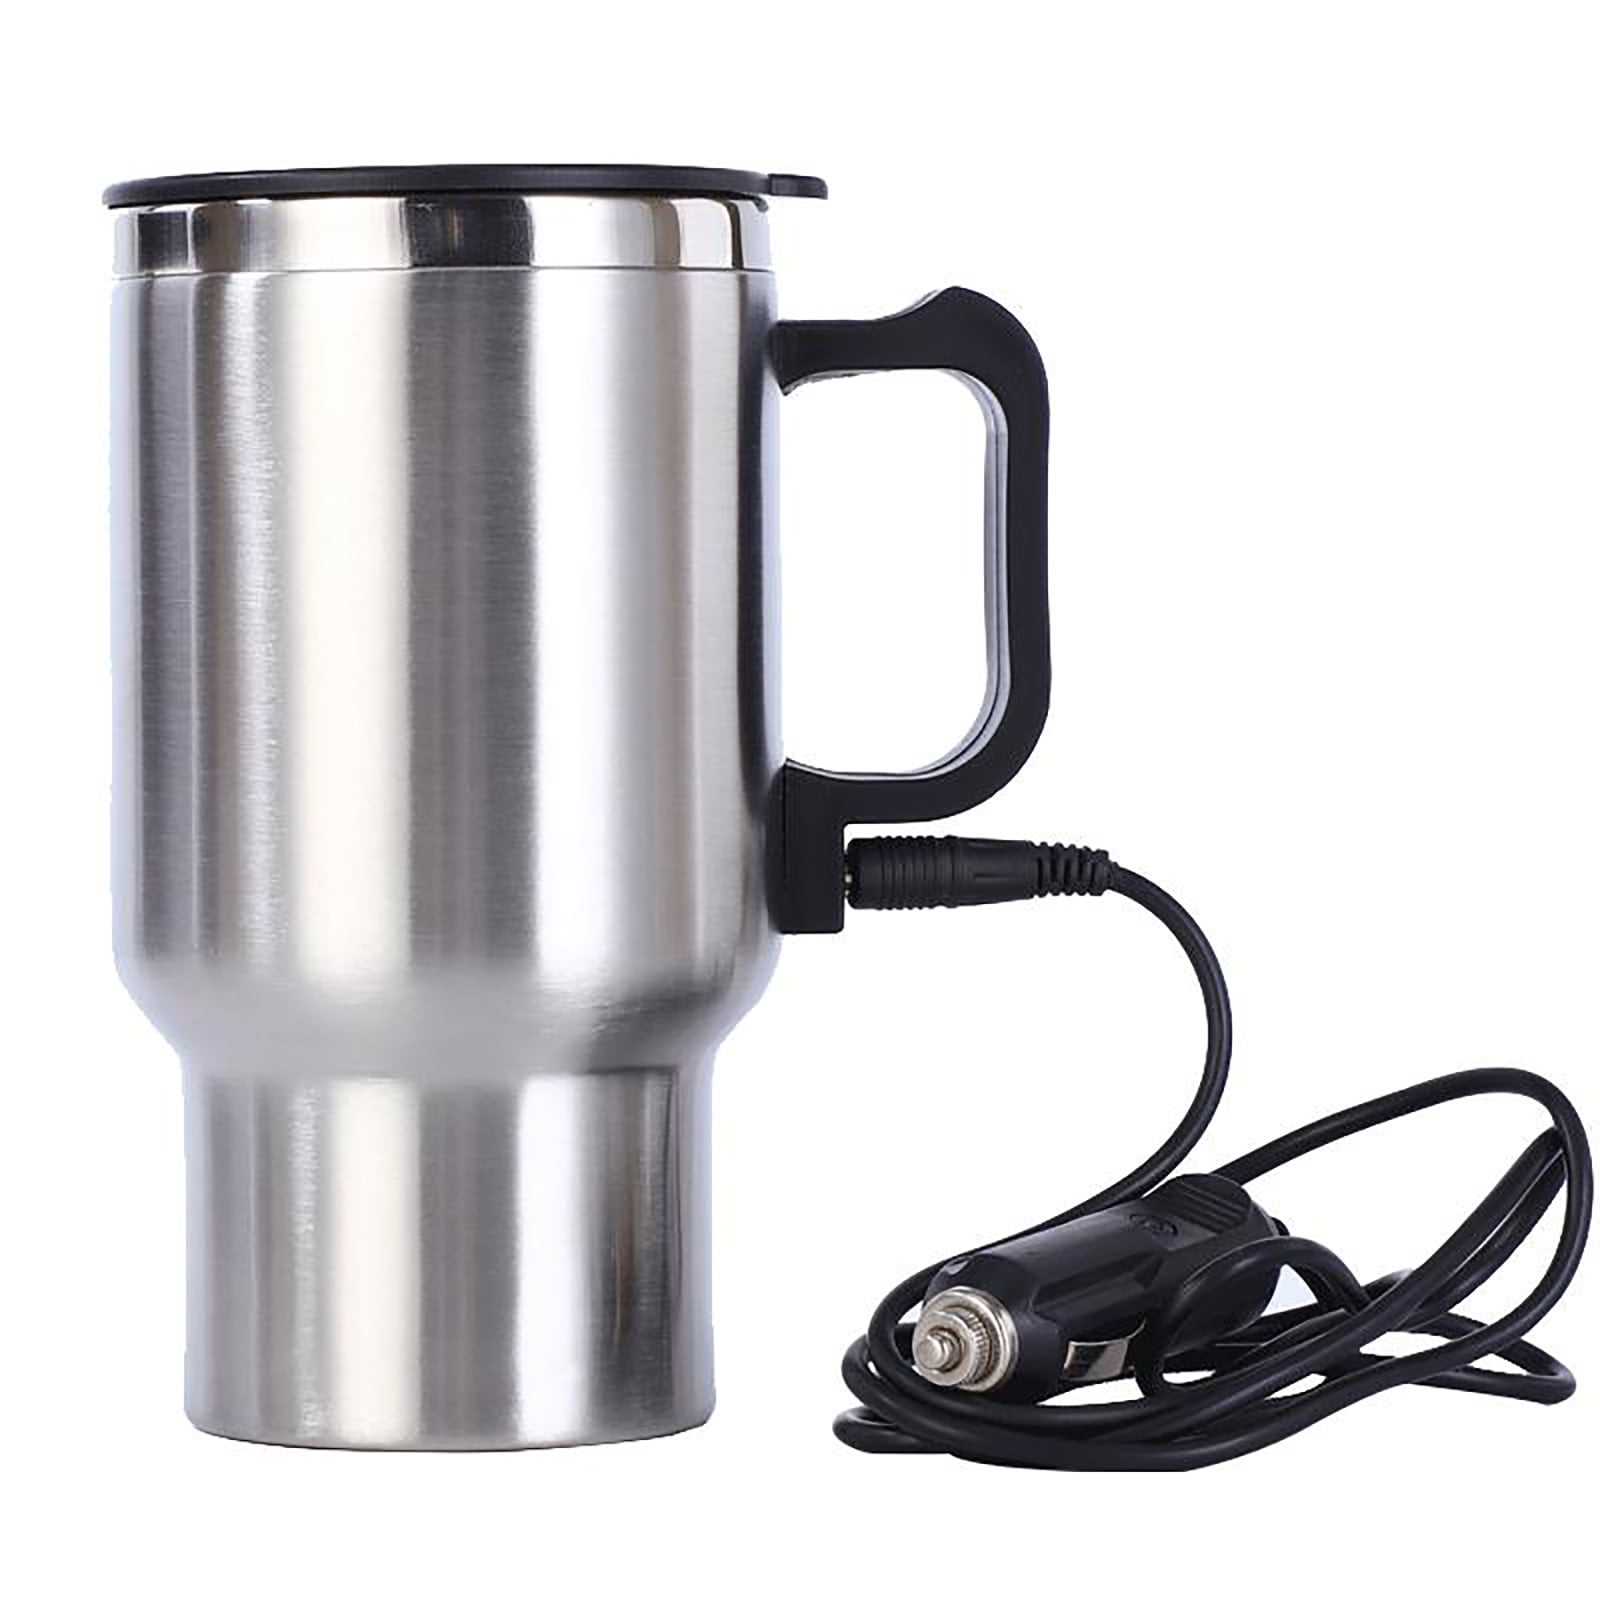  Tech Tools Heated Car Travel Mug - Keeps Your Bevrege Hot -  Retro Style - Stainless Steel 12 Volts (Black) : Home & Kitchen